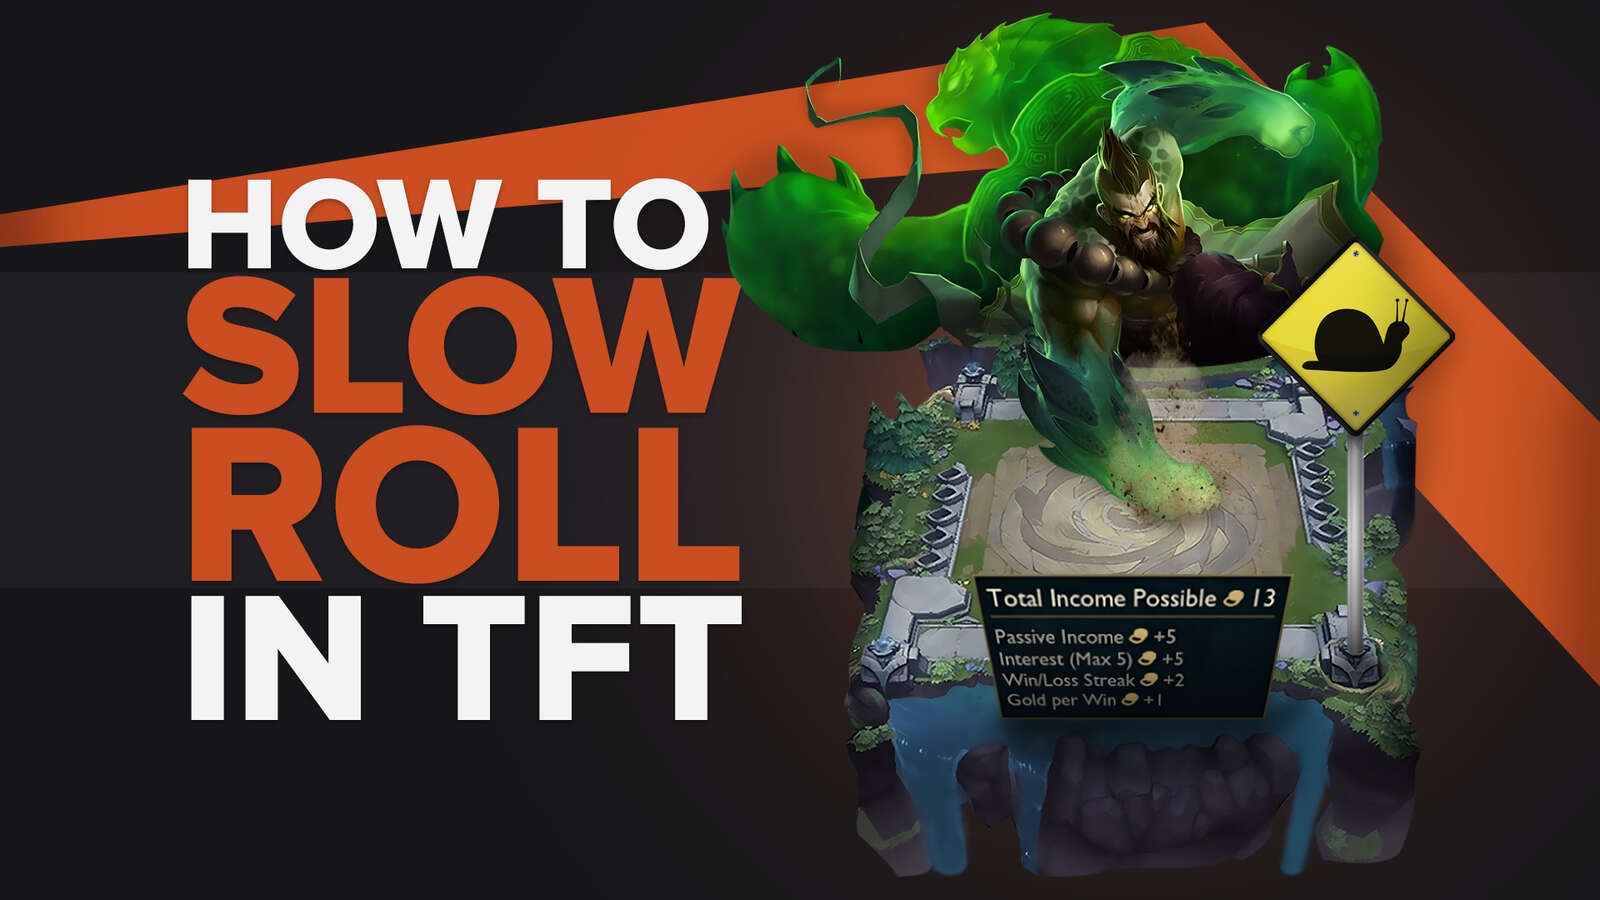 How To Slow Roll In TFT